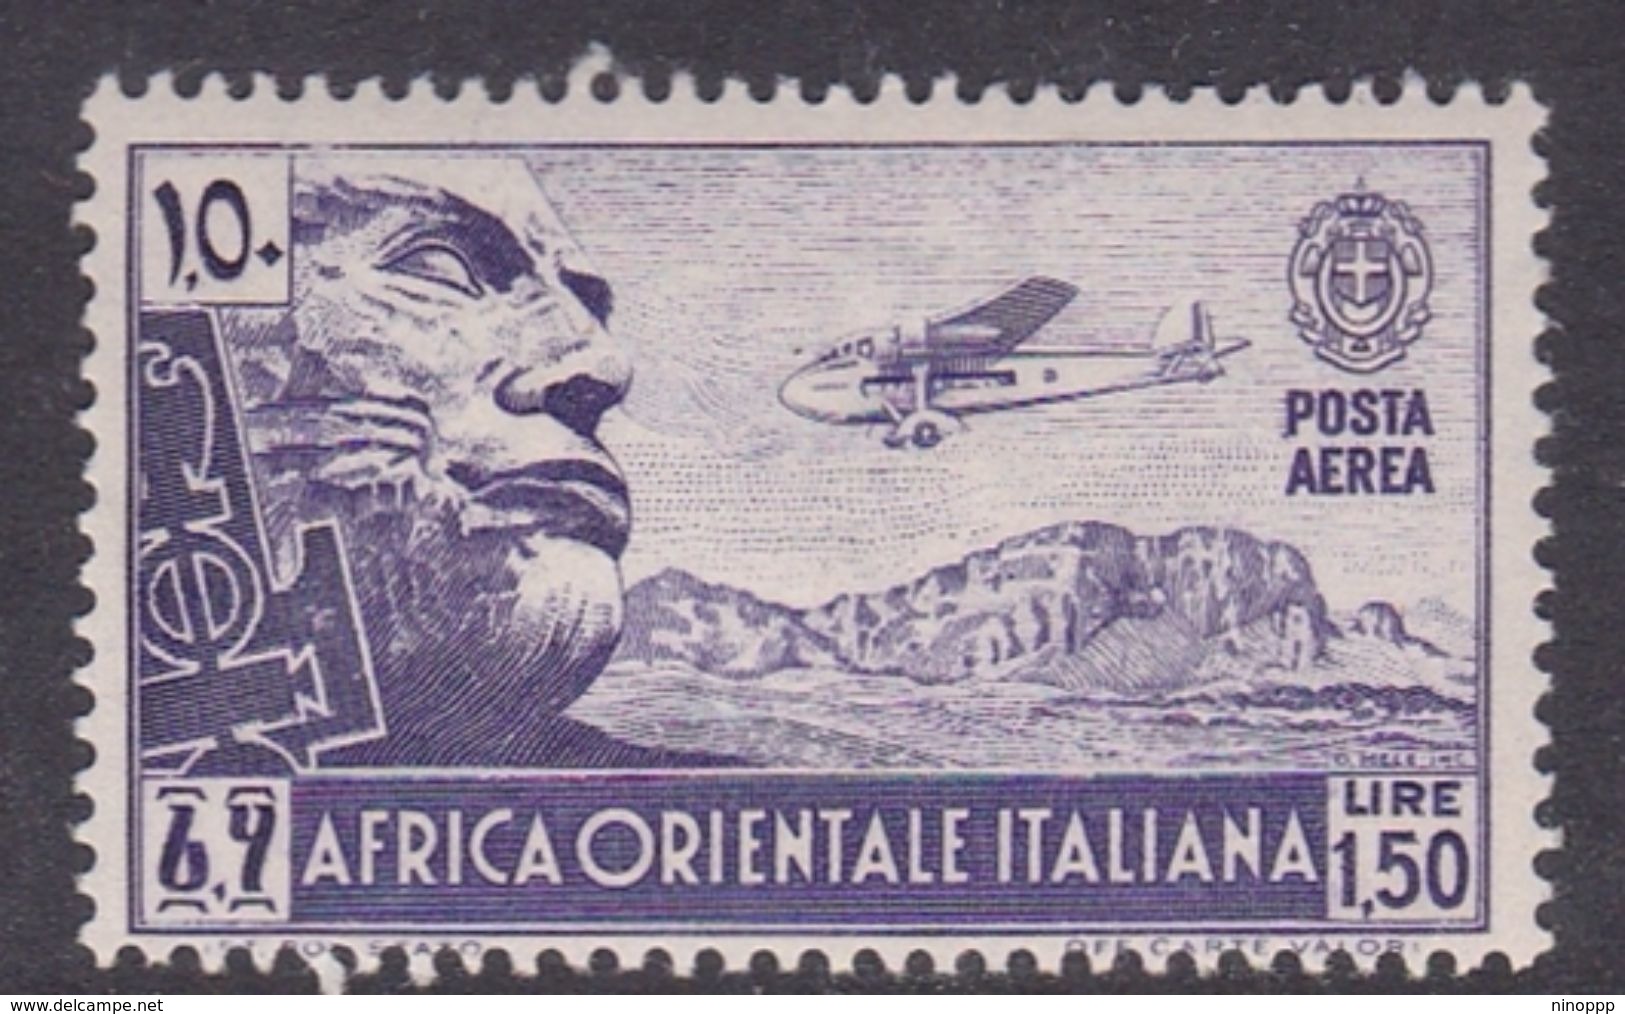 Italy-Colonies And Territories-Italian Eastern Africa AP6 1938 Air Post 1,50 Violet MH - Emissions Générales